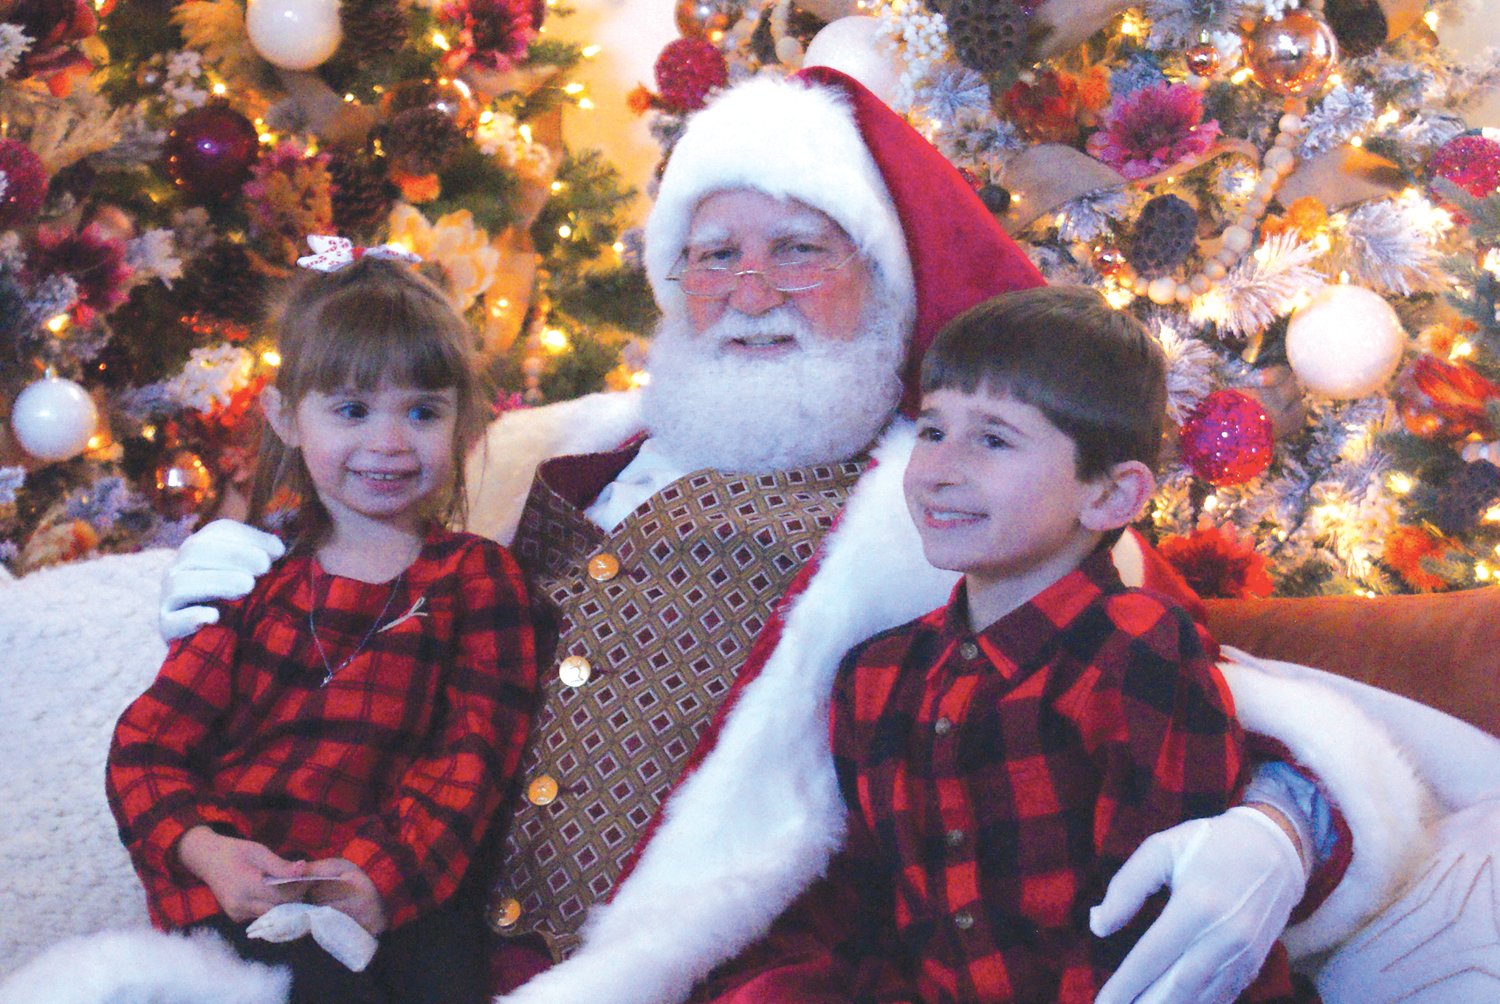 WAITING FOR THEIR PICTURE: Siblings Ella, 4, and Gabriel Romano, 8, were amongst the many children who waited for a picture with Santa at Garden City Center.